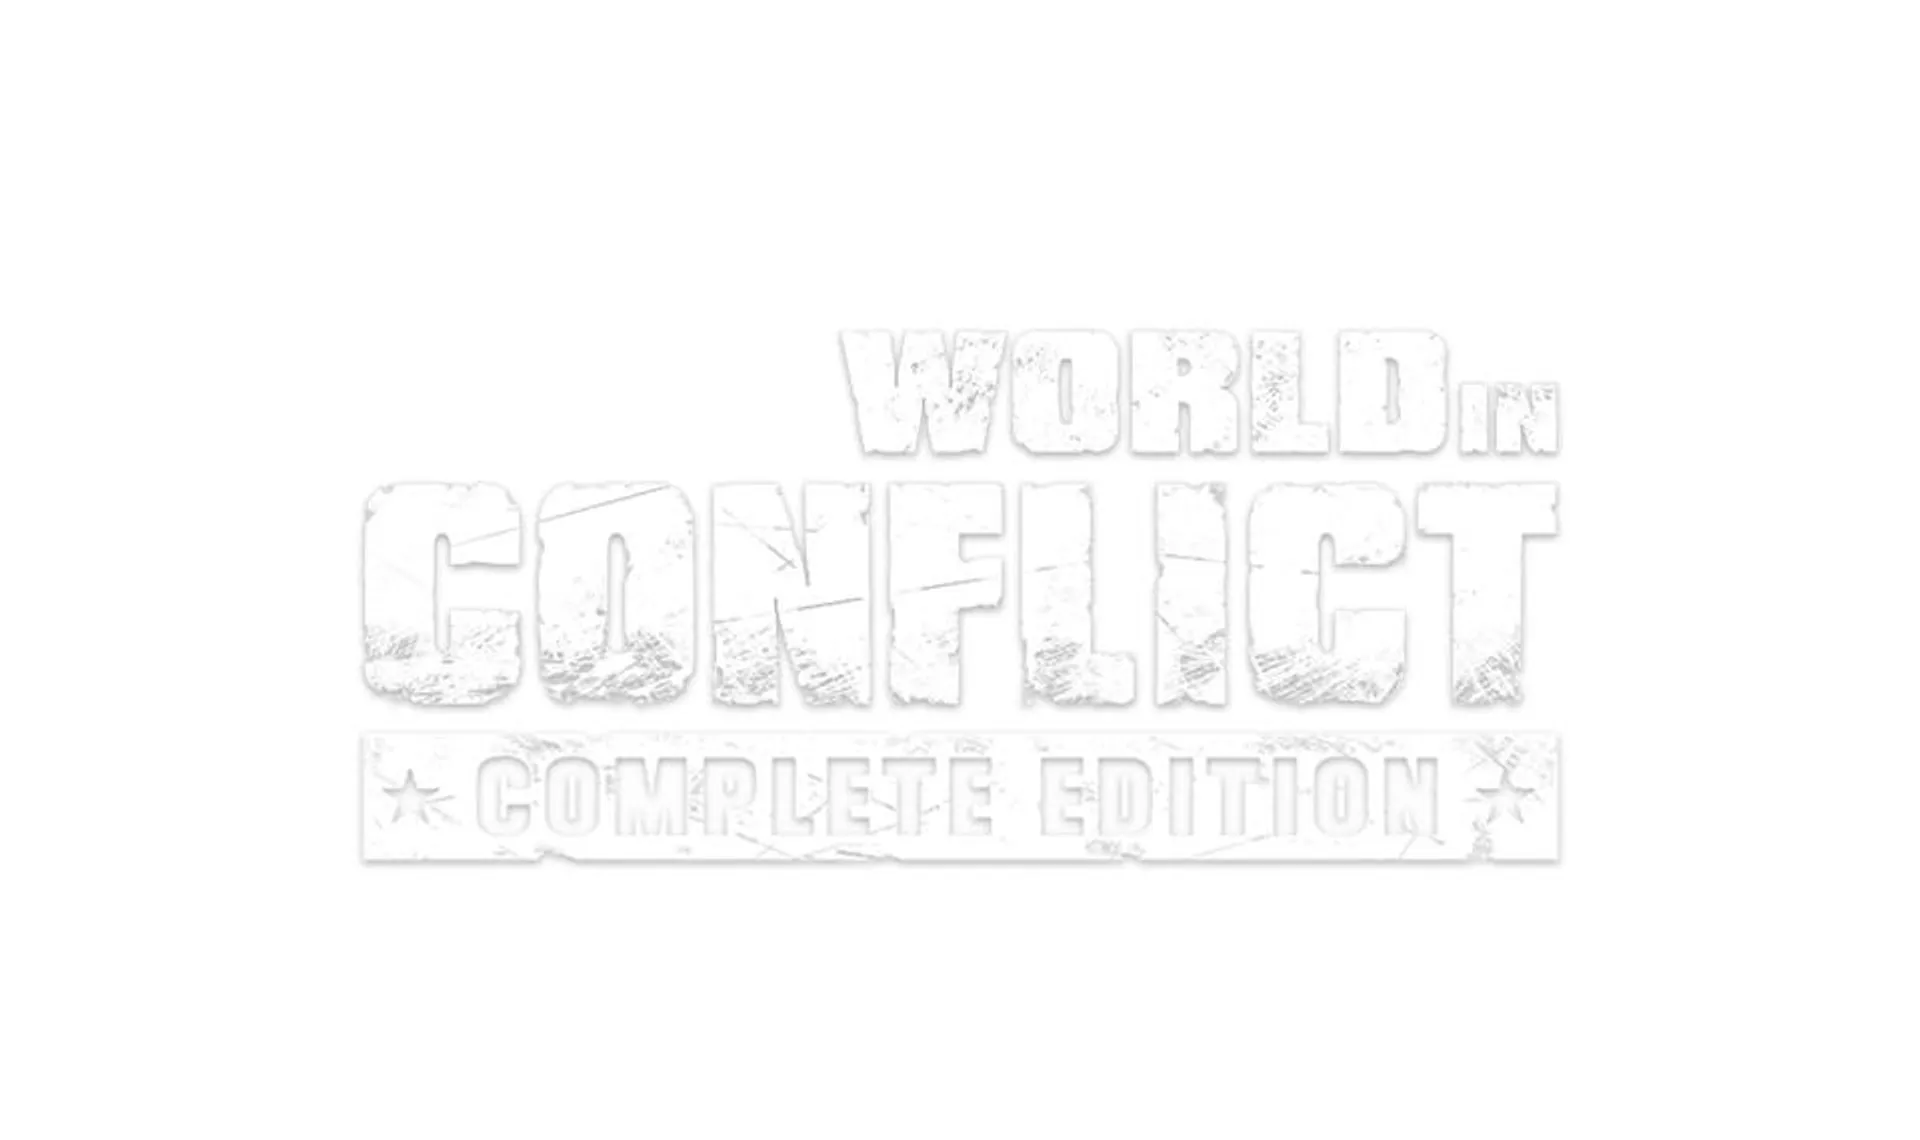 World in Conflict: Complete Edition